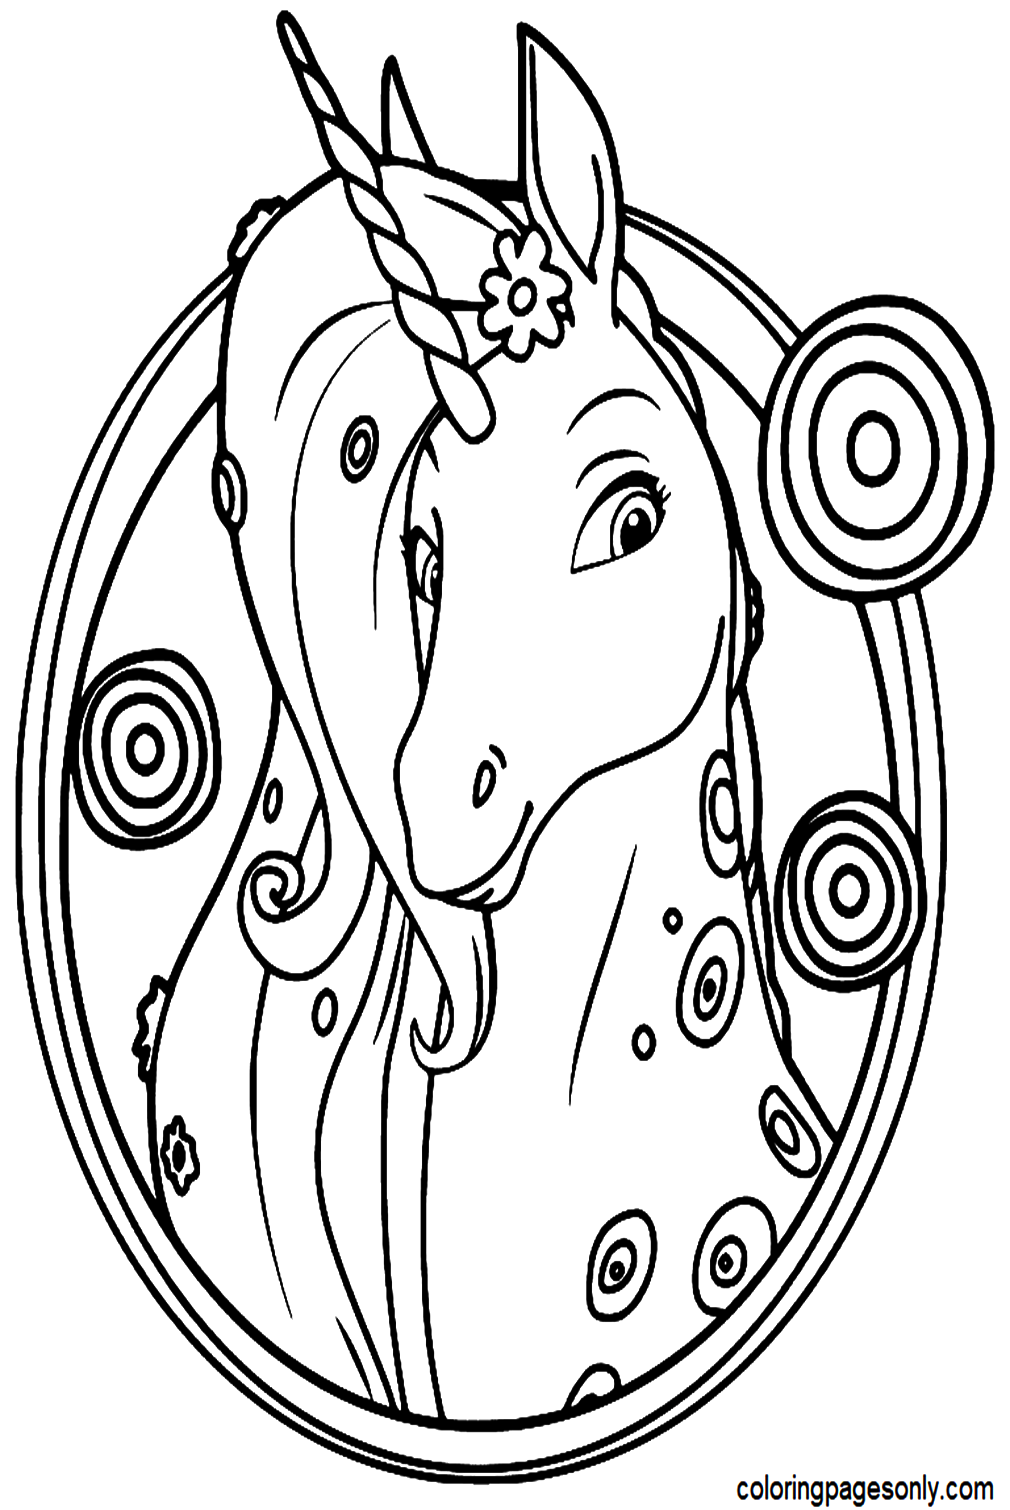 Unicorn Coloring Sheet Coloring Pages